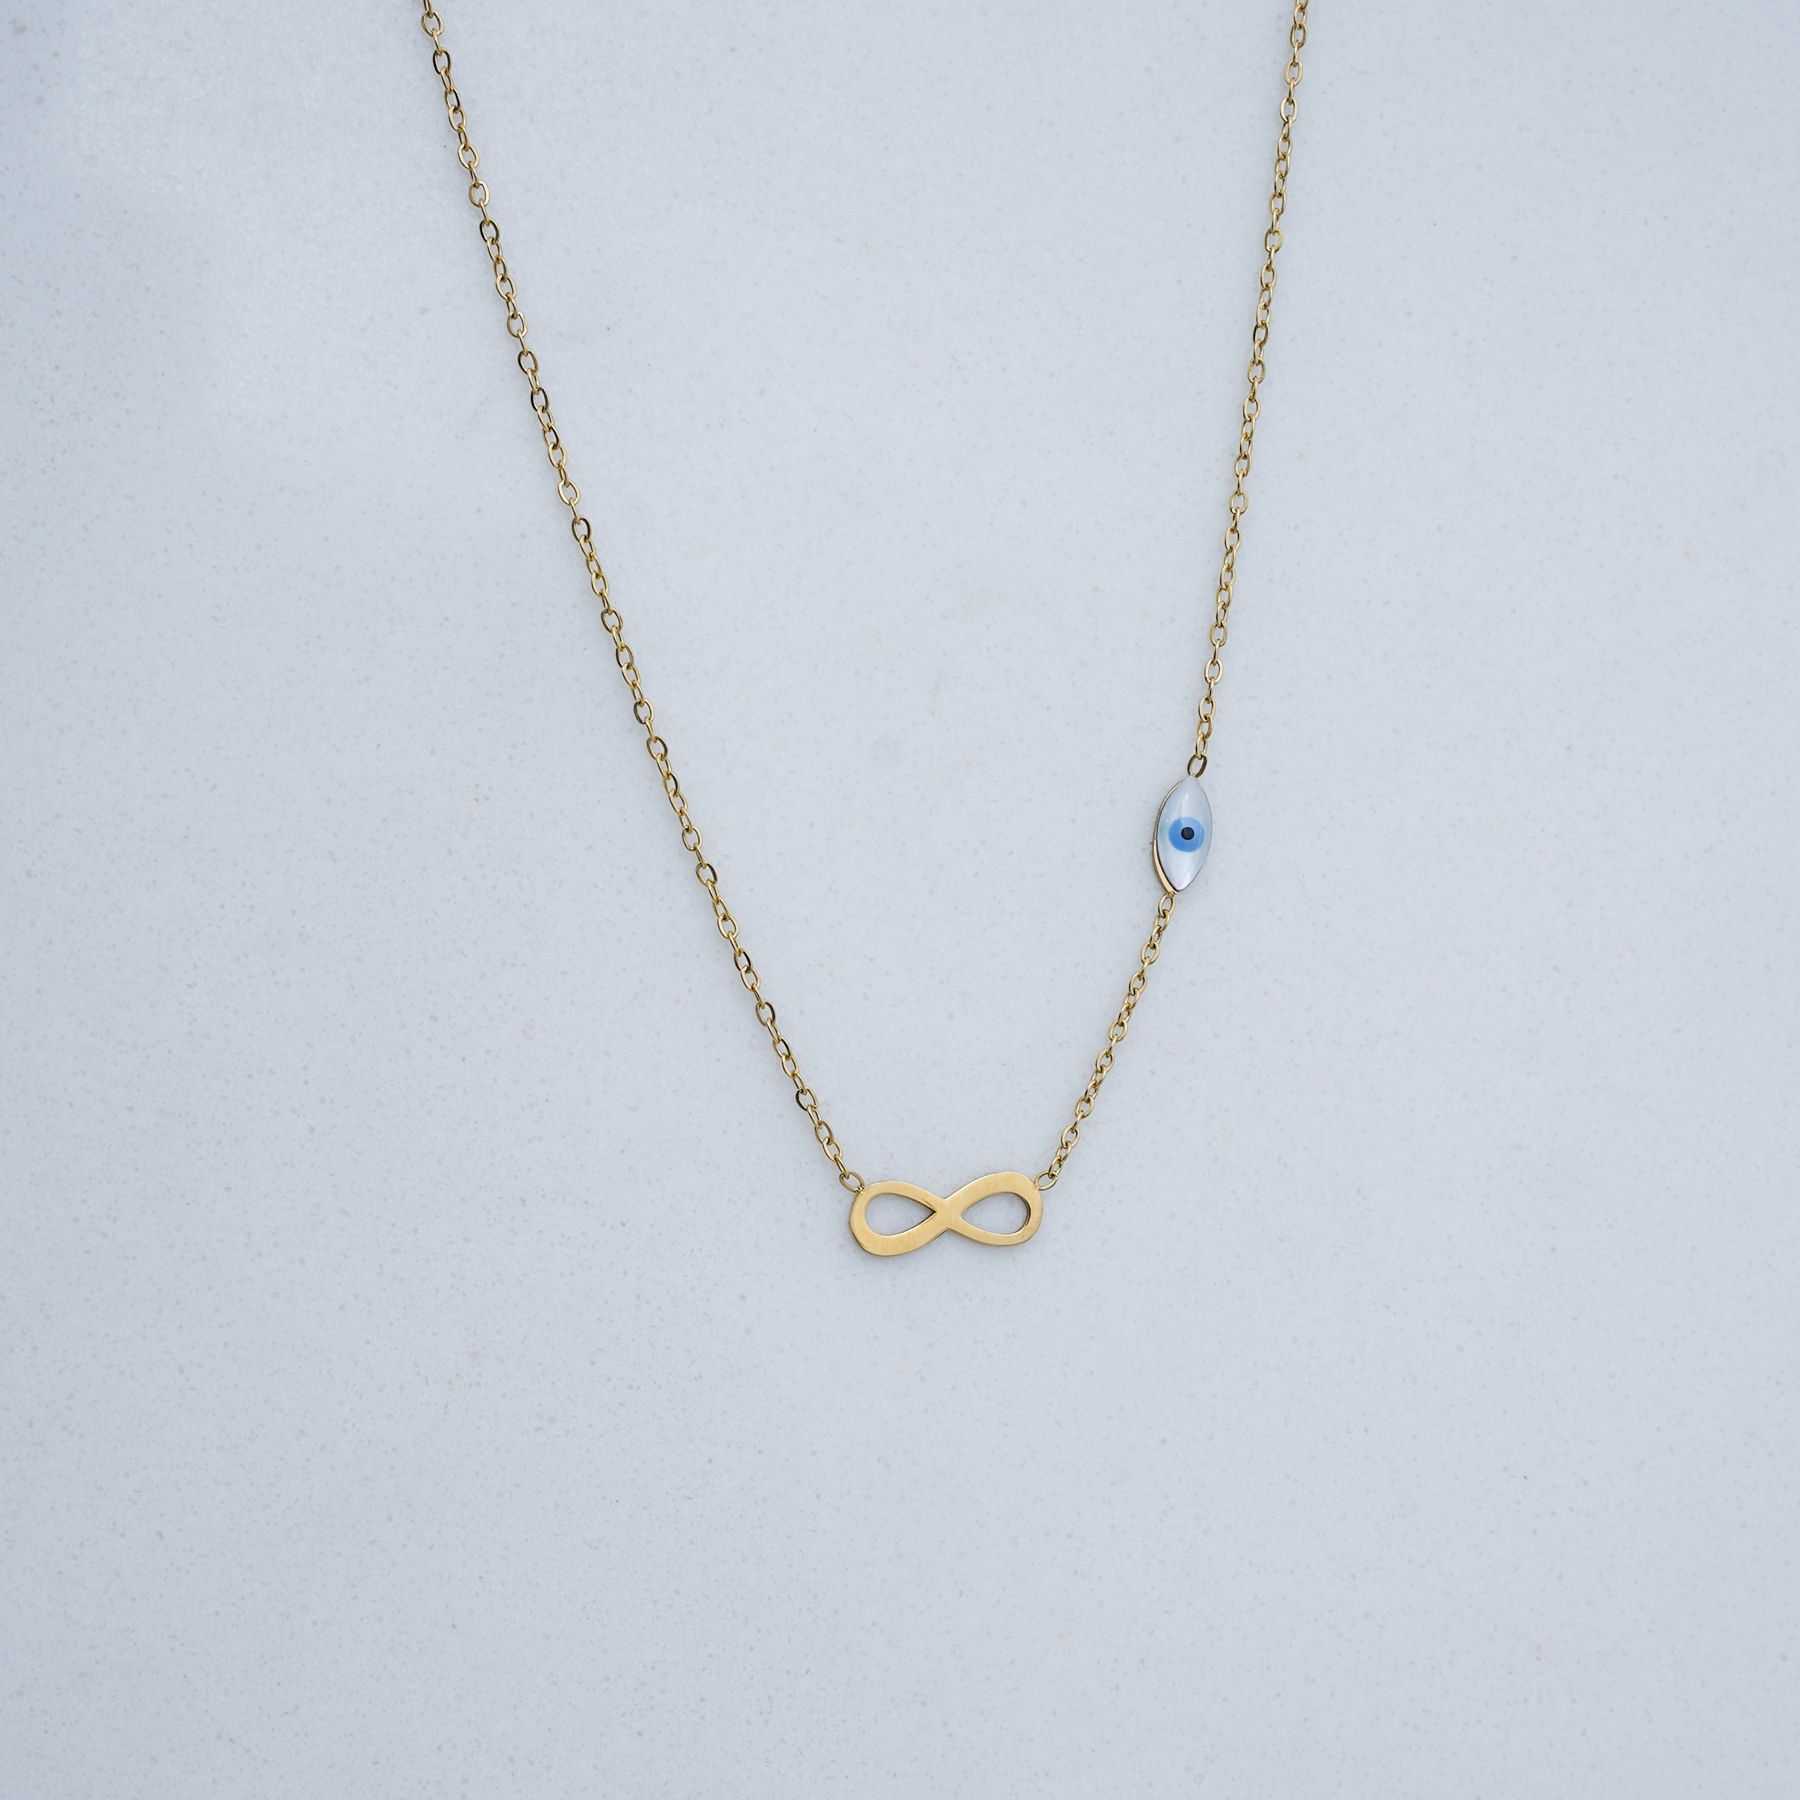 INFINITELY NECKLACE - GOLD